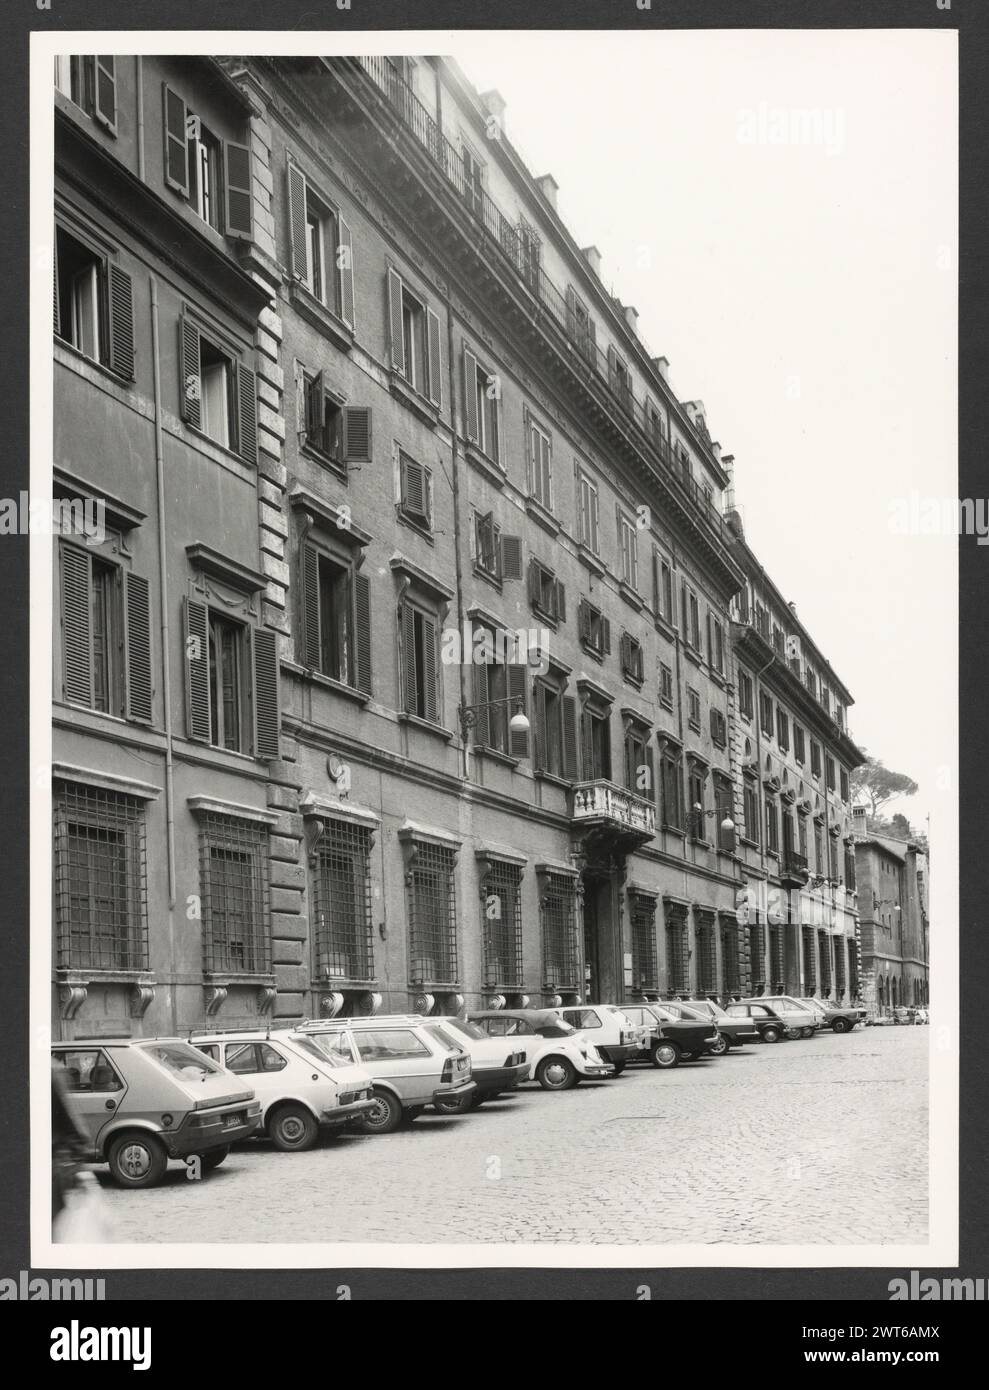 Lazio Roma Rome Piazza Campitelli. Hutzel, Max 1960-1990 Two views of the piazza on which are located two buildings, probably Palazzo Albertoni and Palazzo Gaspari. German-born photographer and scholar Max Hutzel (1911-1988) photographed in Italy from the early 1960s until his death. The result of this project, referred to by Hutzel as Foto Arte Minore, is thorough documentation of art historical development in Italy up to the 18th century, including objects of the Etruscans and the Romans, as well as early Medieval, Romanesque, Gothic, Renaissance and Baroque monuments. Images are organized b Stock Photo